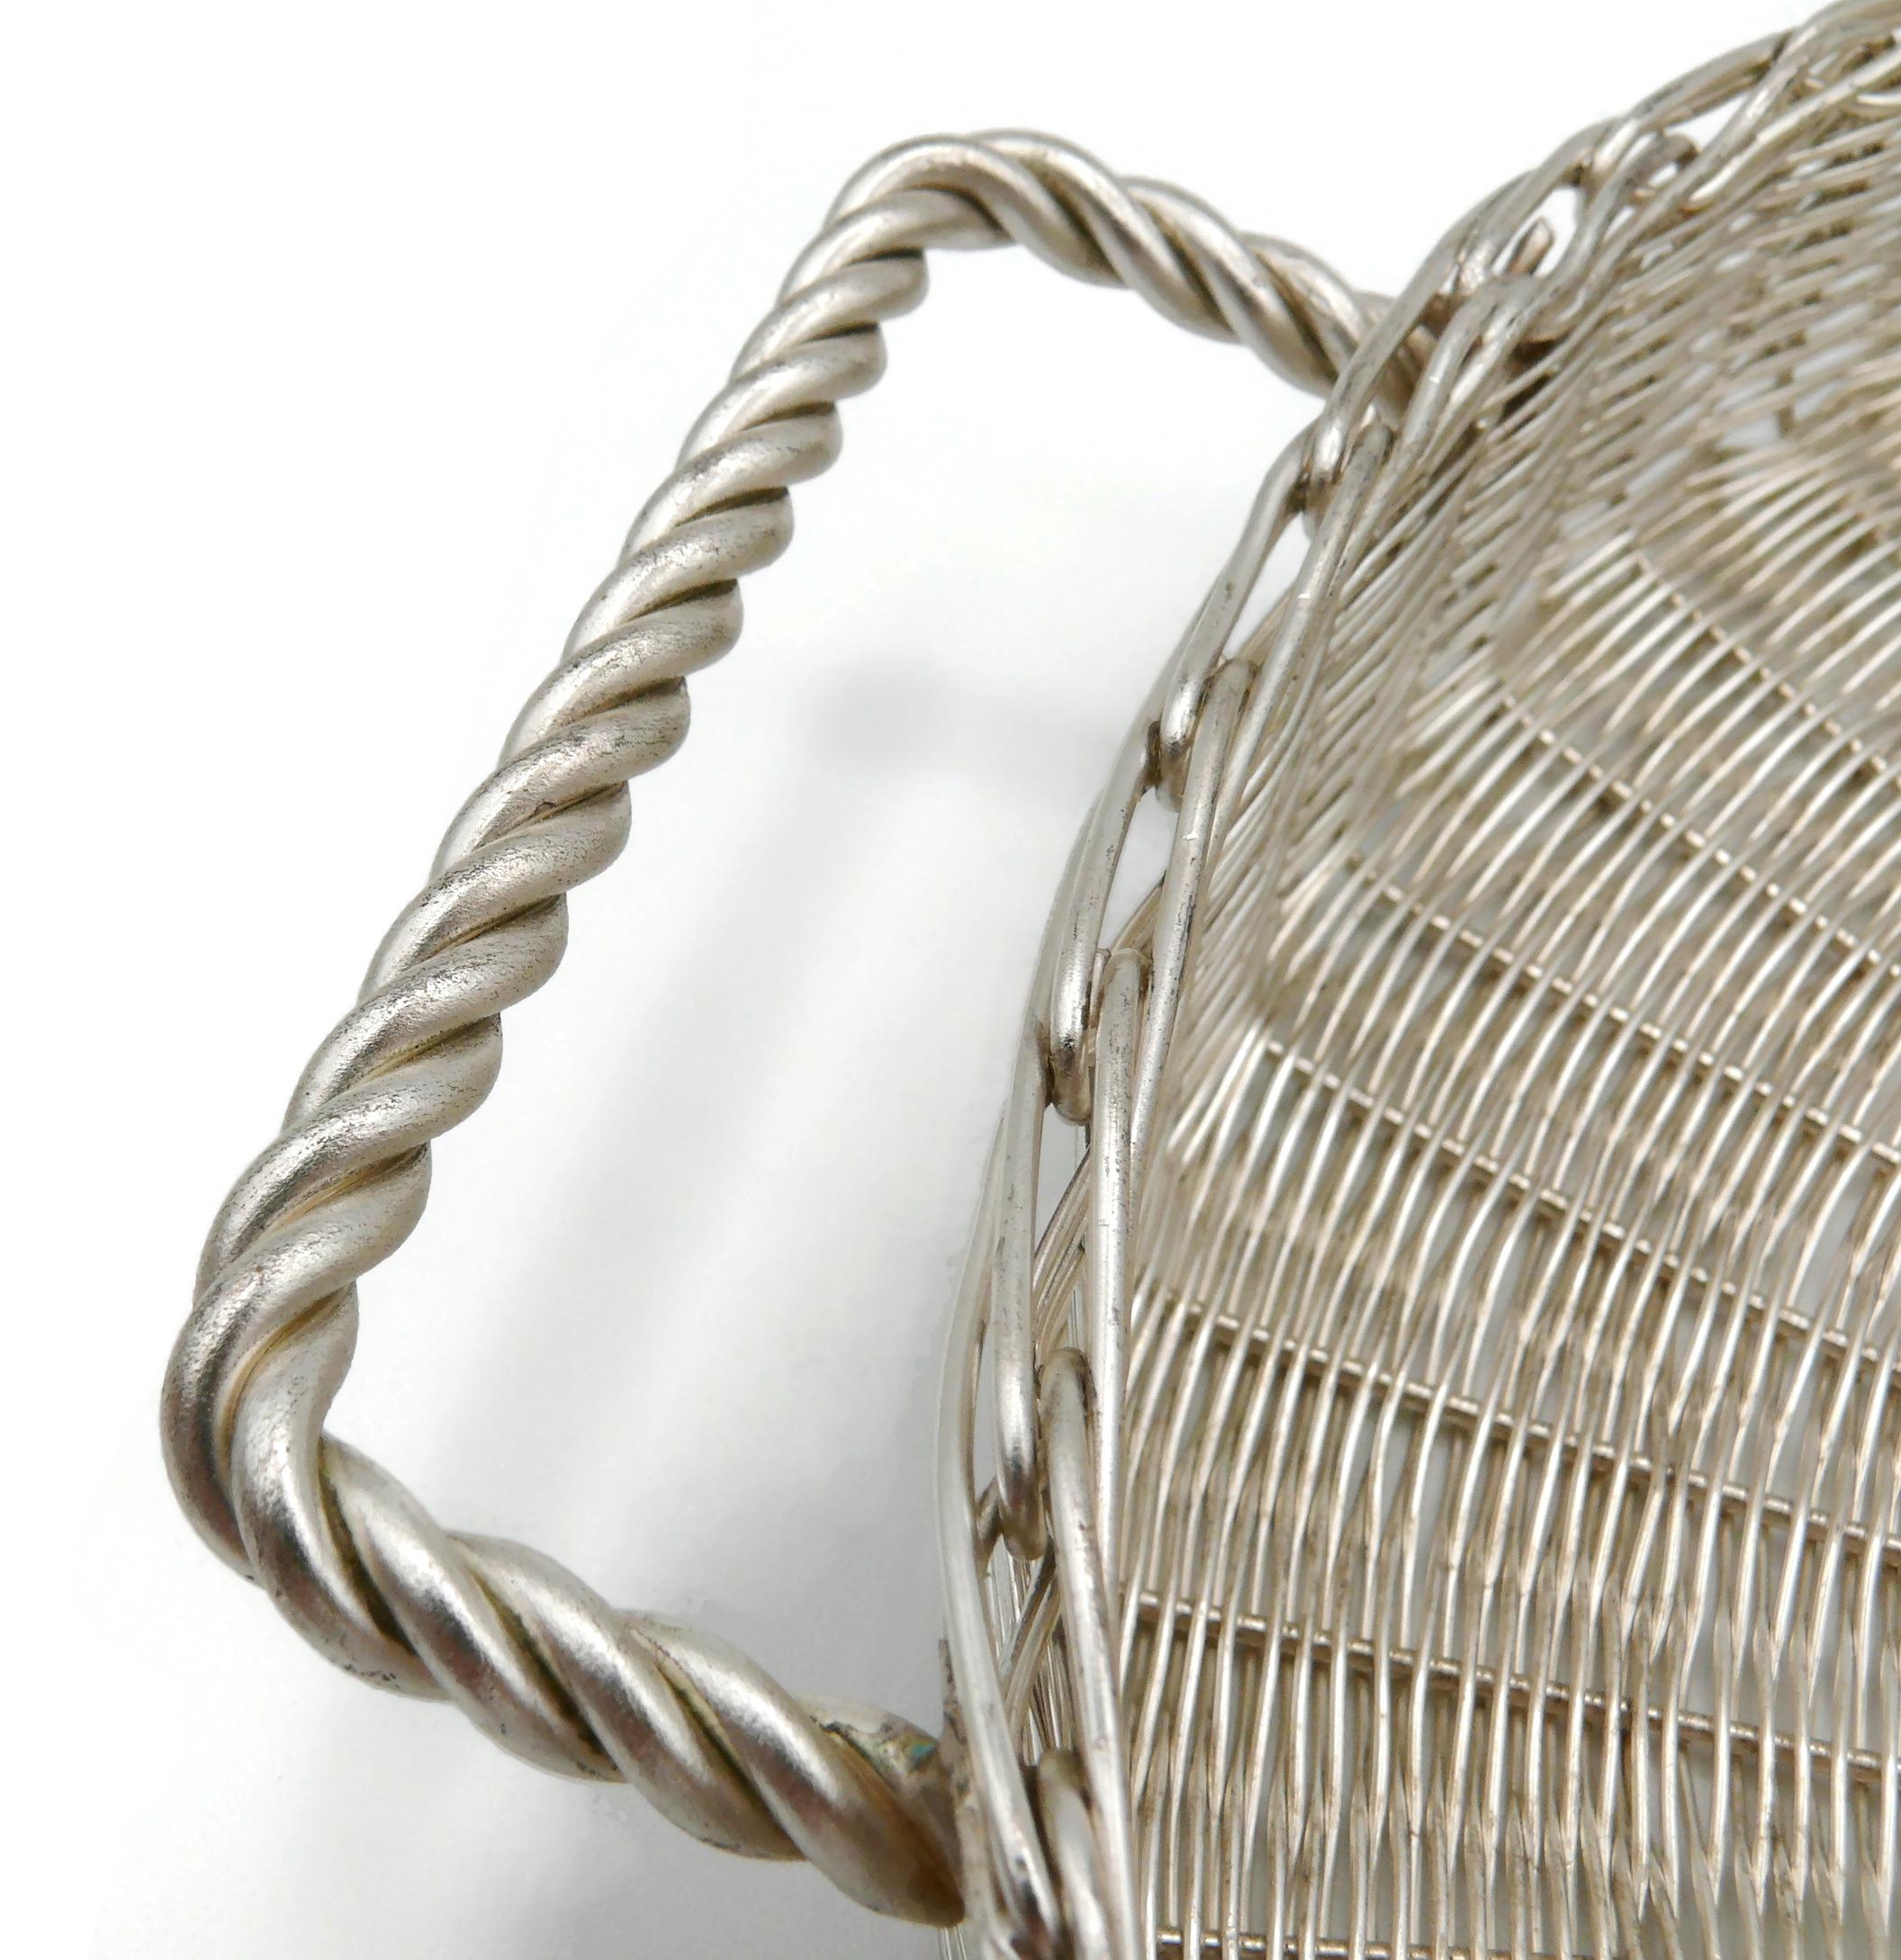 CHRISTIAN DIOR Home Collection Vintage Silver Plated Wicker Style Basket 11